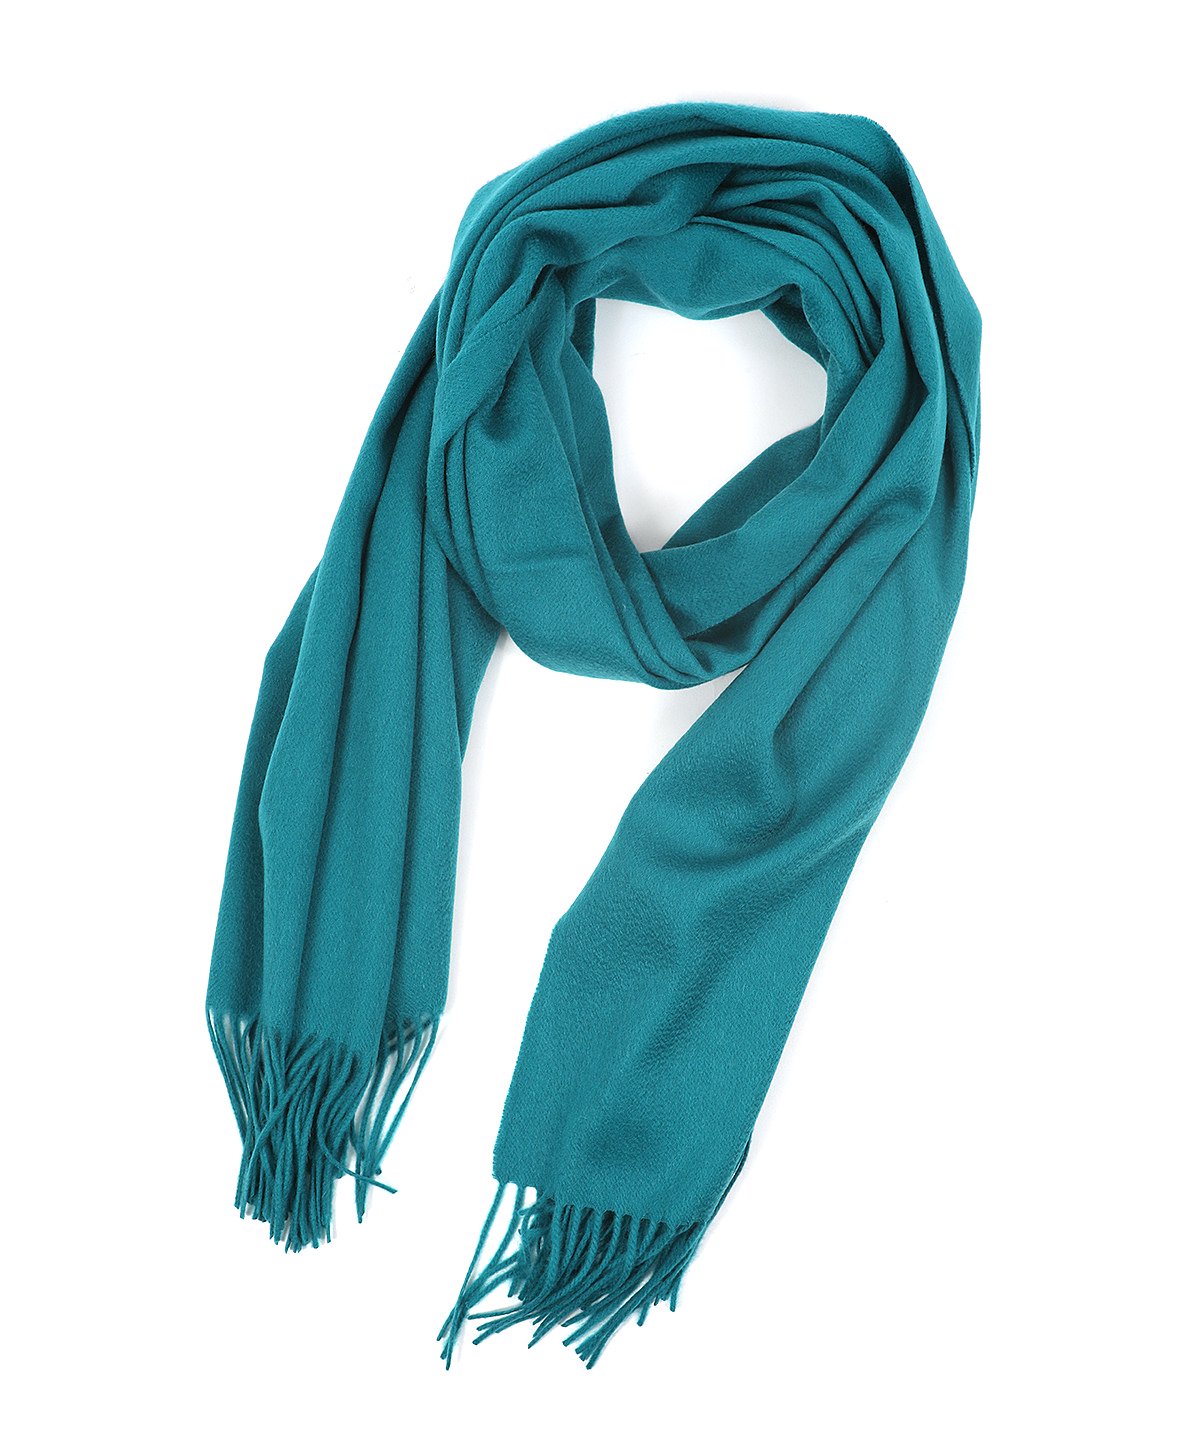 YOUNG'S BEST CASHMERE SCARF